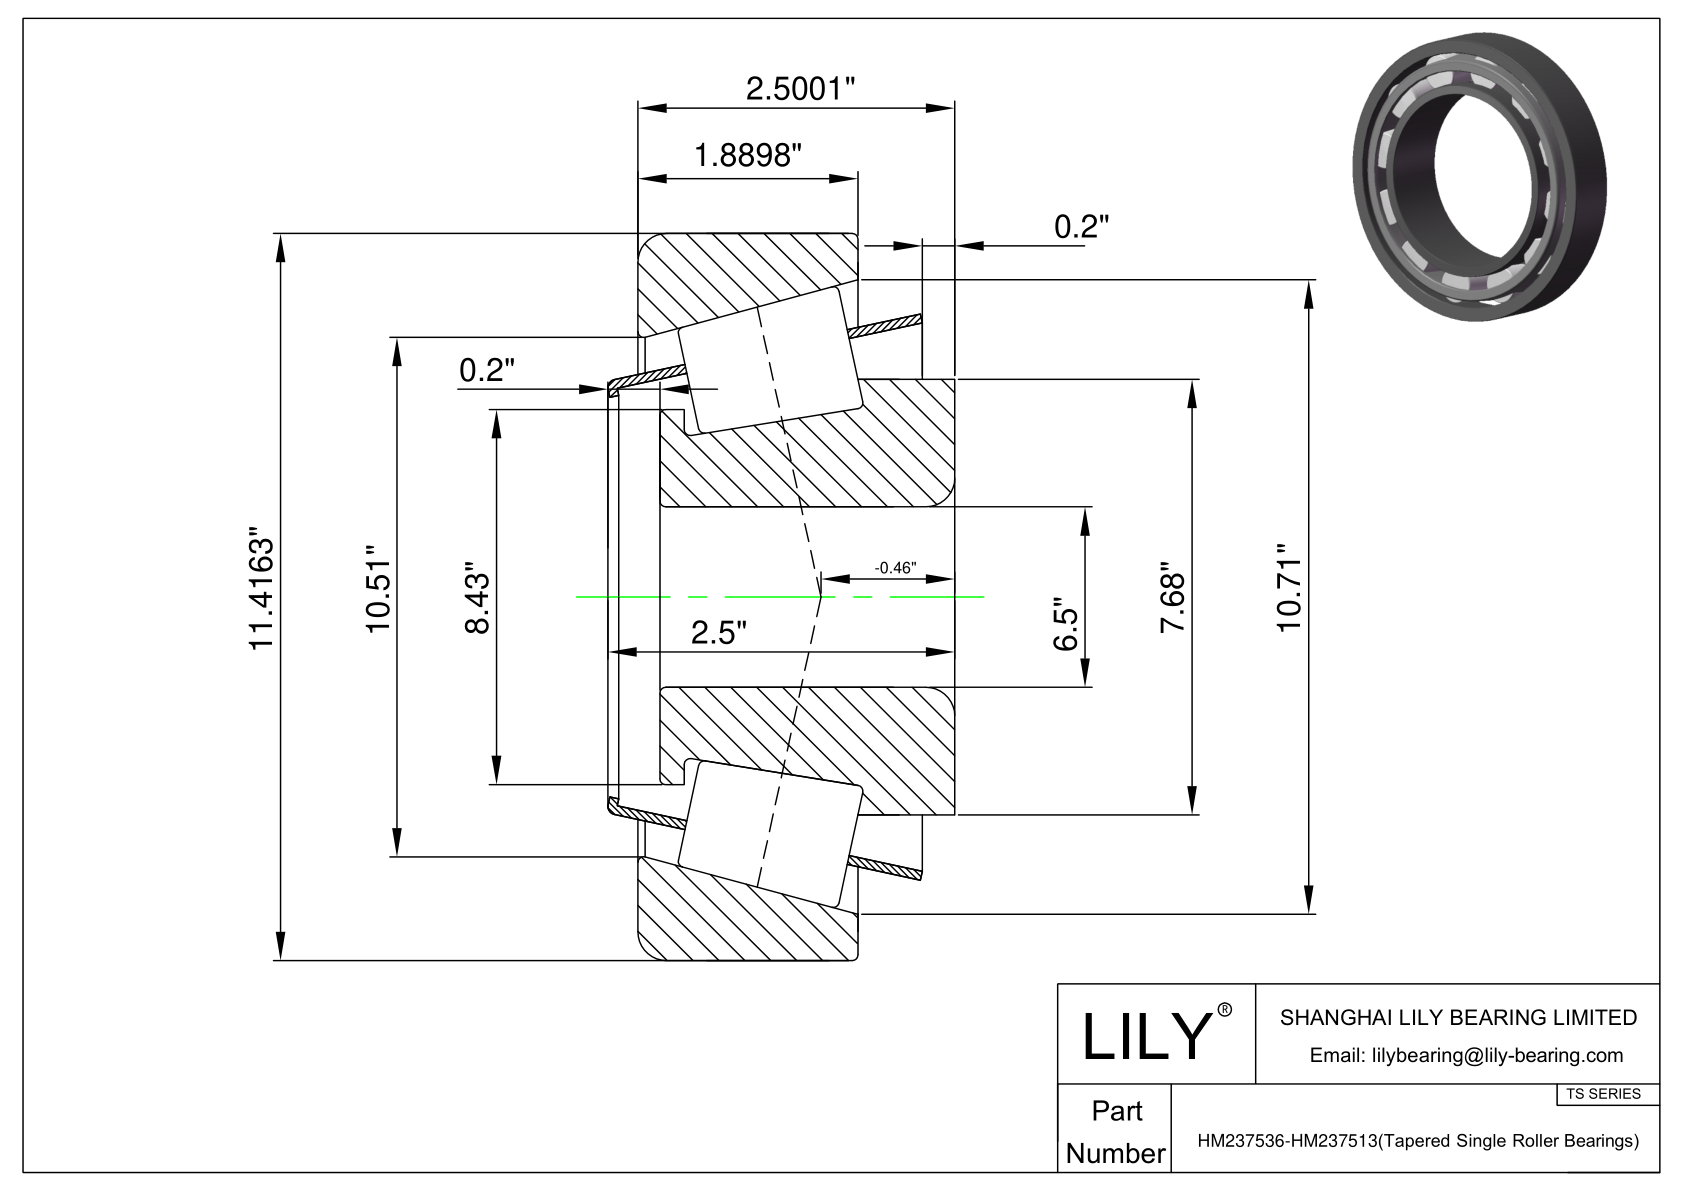 HM237536-HM237513 TS (Tapered Single Roller Bearings) (Imperial) cad drawing